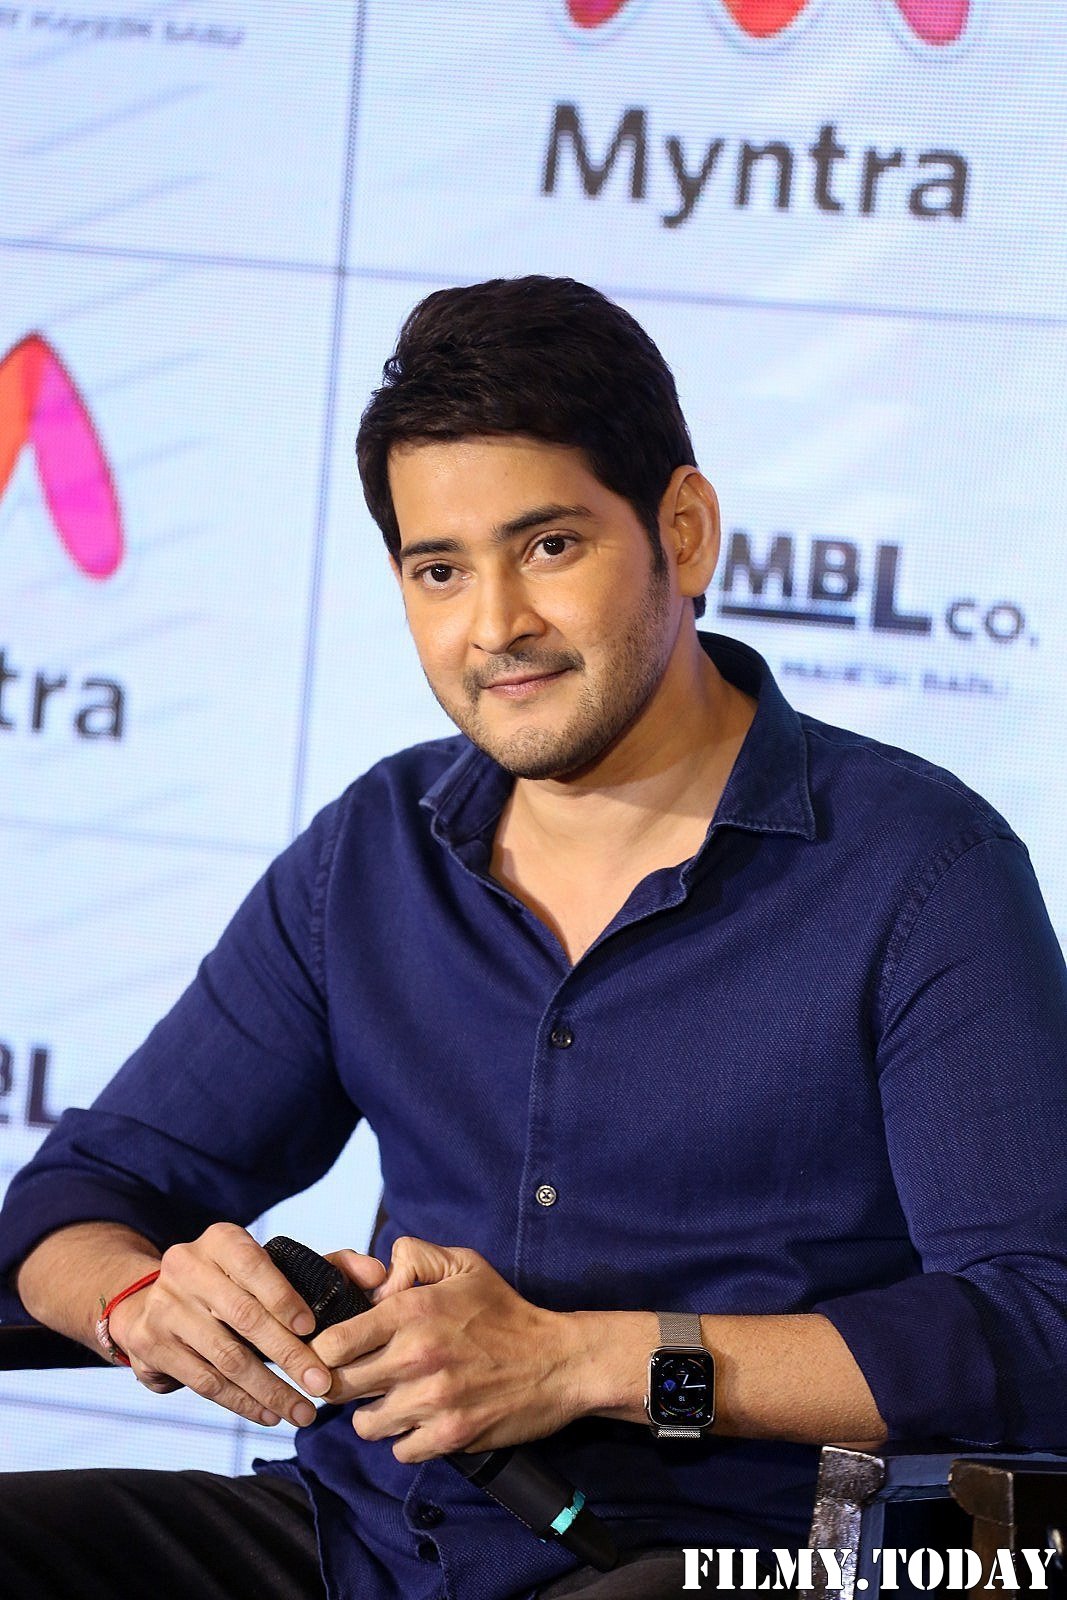 Mahesh Babu Launches His Apparel Brand The Humbl Co On Myntra Photos | Picture 1715422